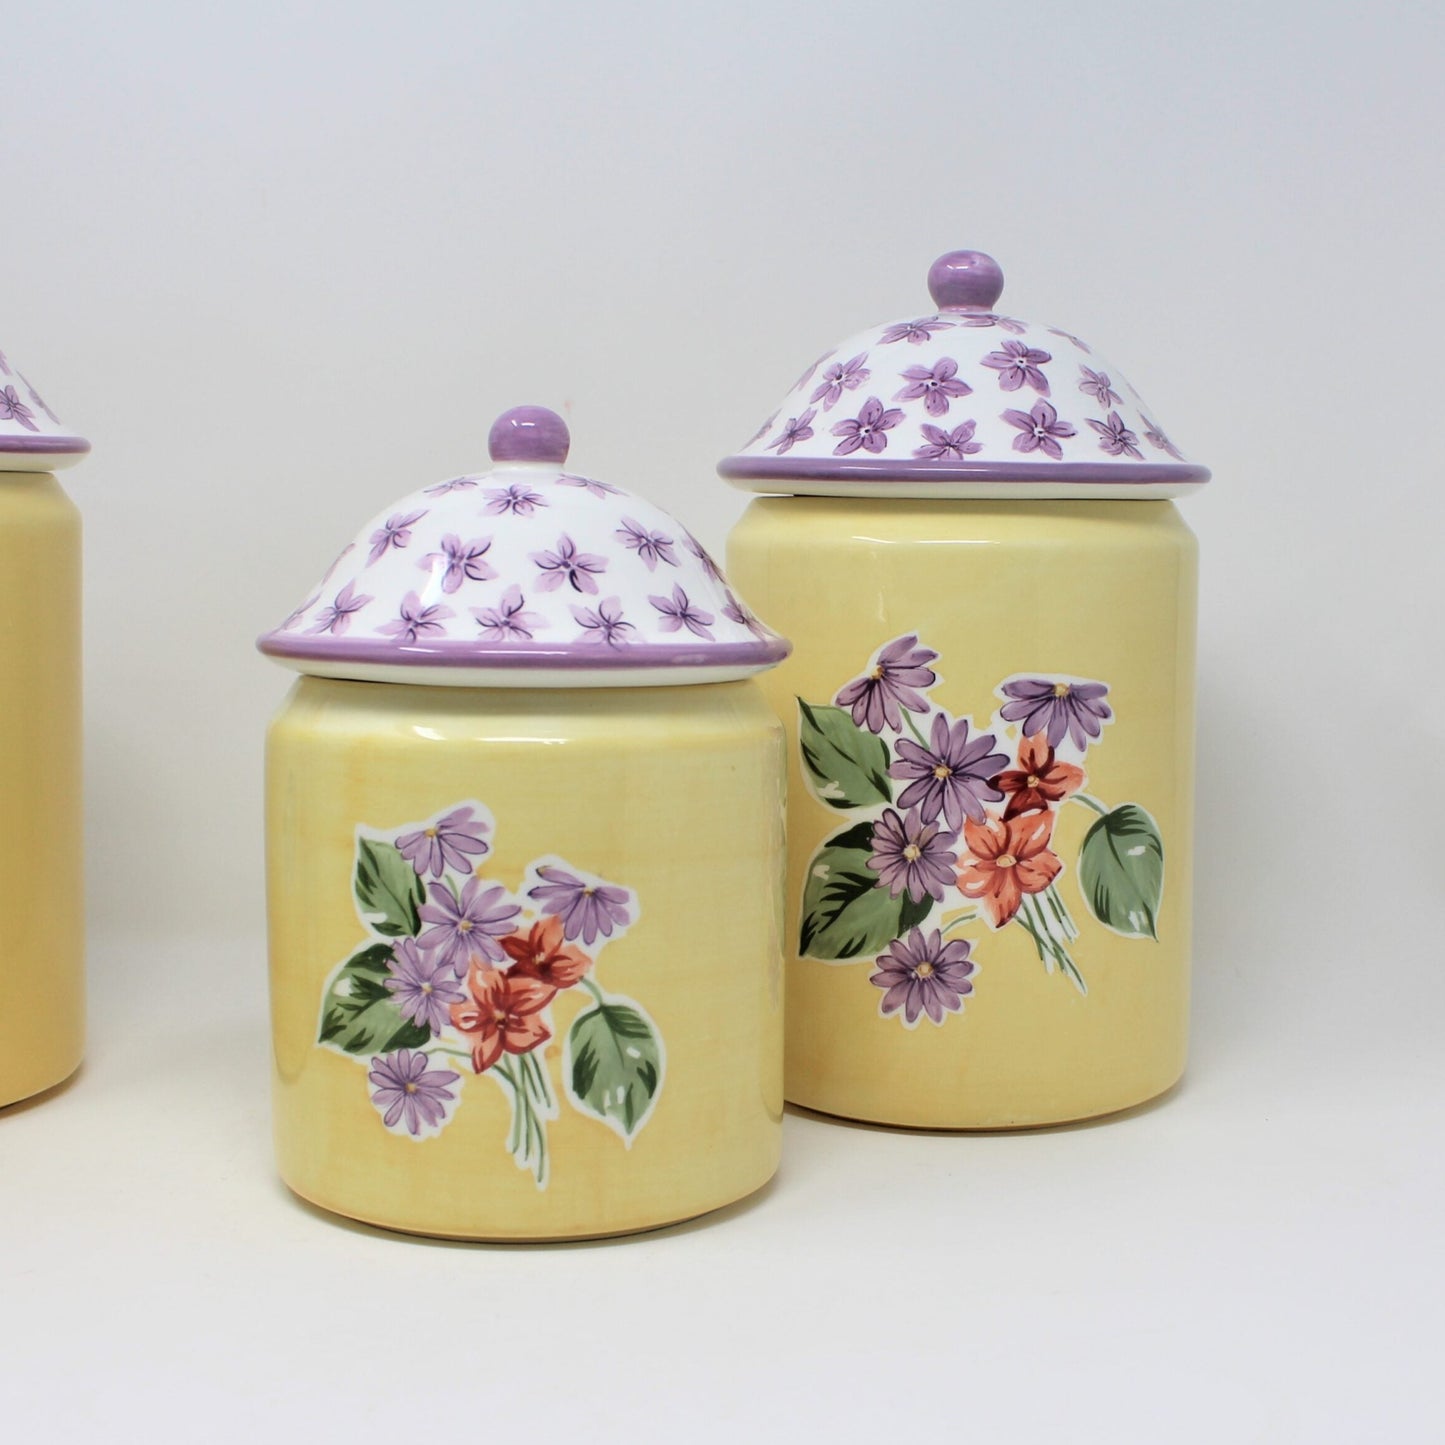 Canister Set, Waverly, Garden Room Cottage Collection "Field of Flowers", Set of 4, Vintage Ceramic